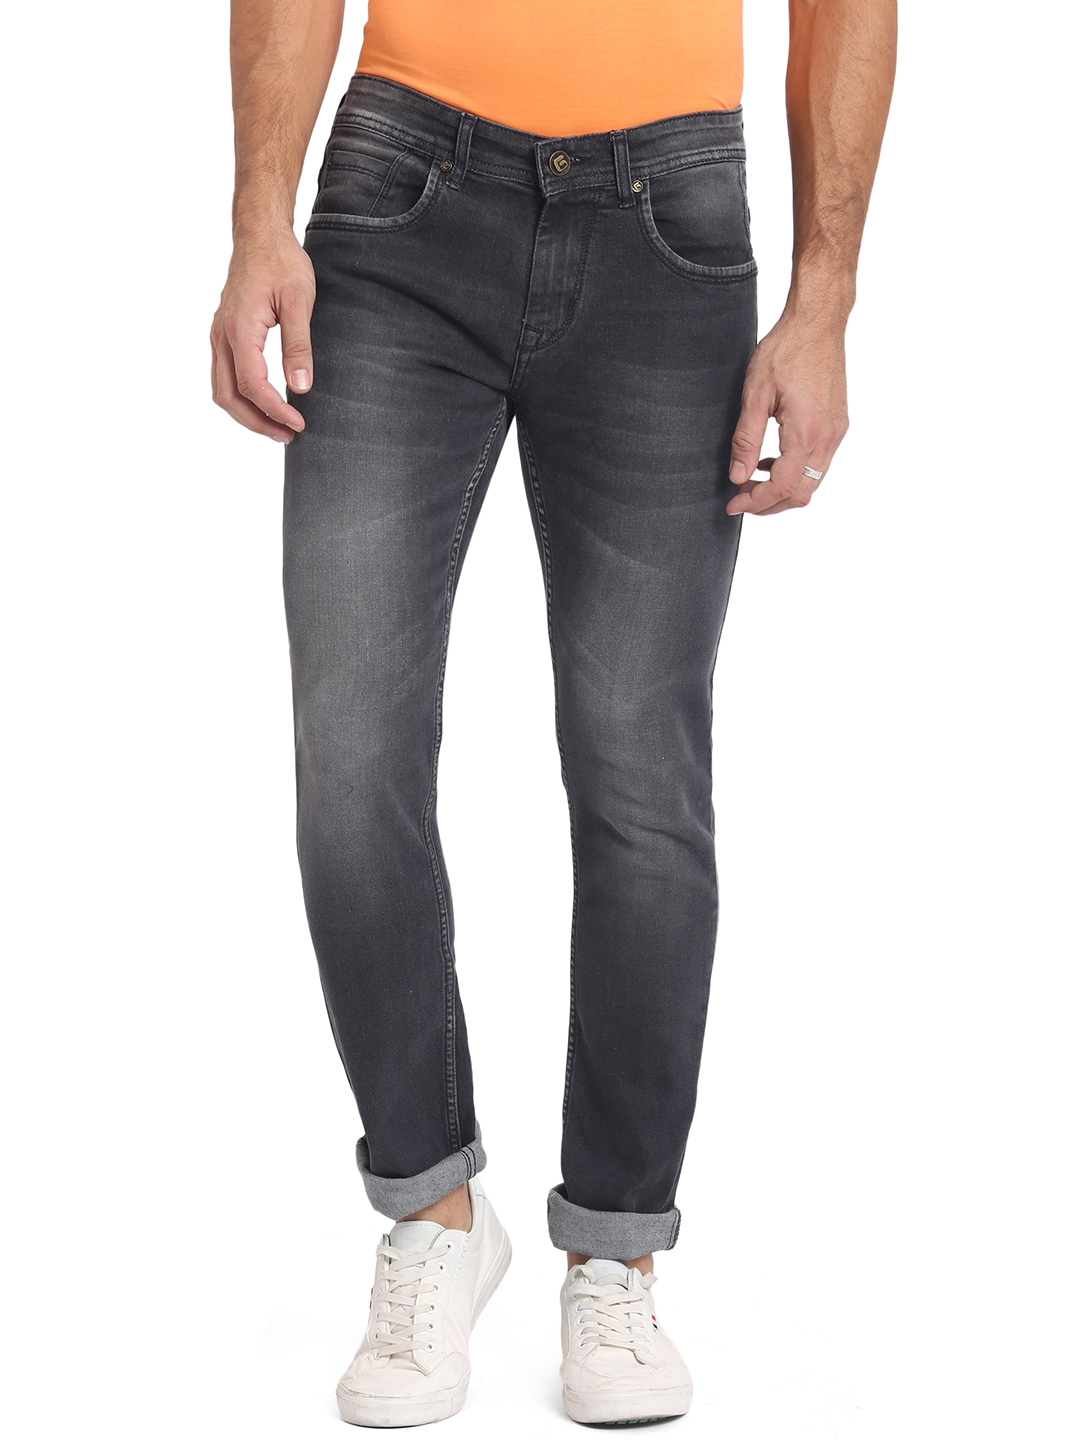 Greenfibre | Forest Grey Washed Straight Fit Jeans | Greenfibre